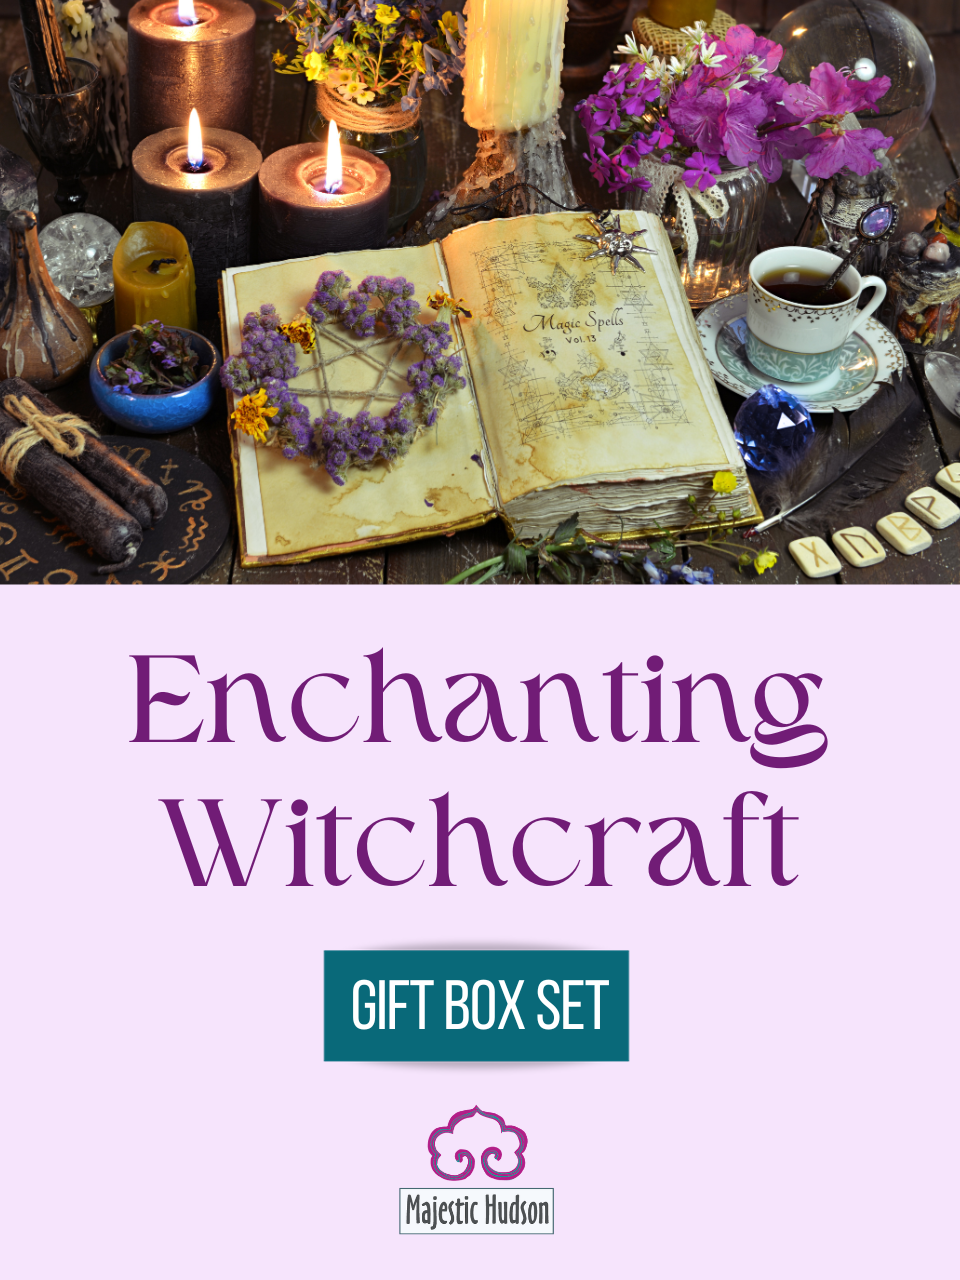 The Witch Kit